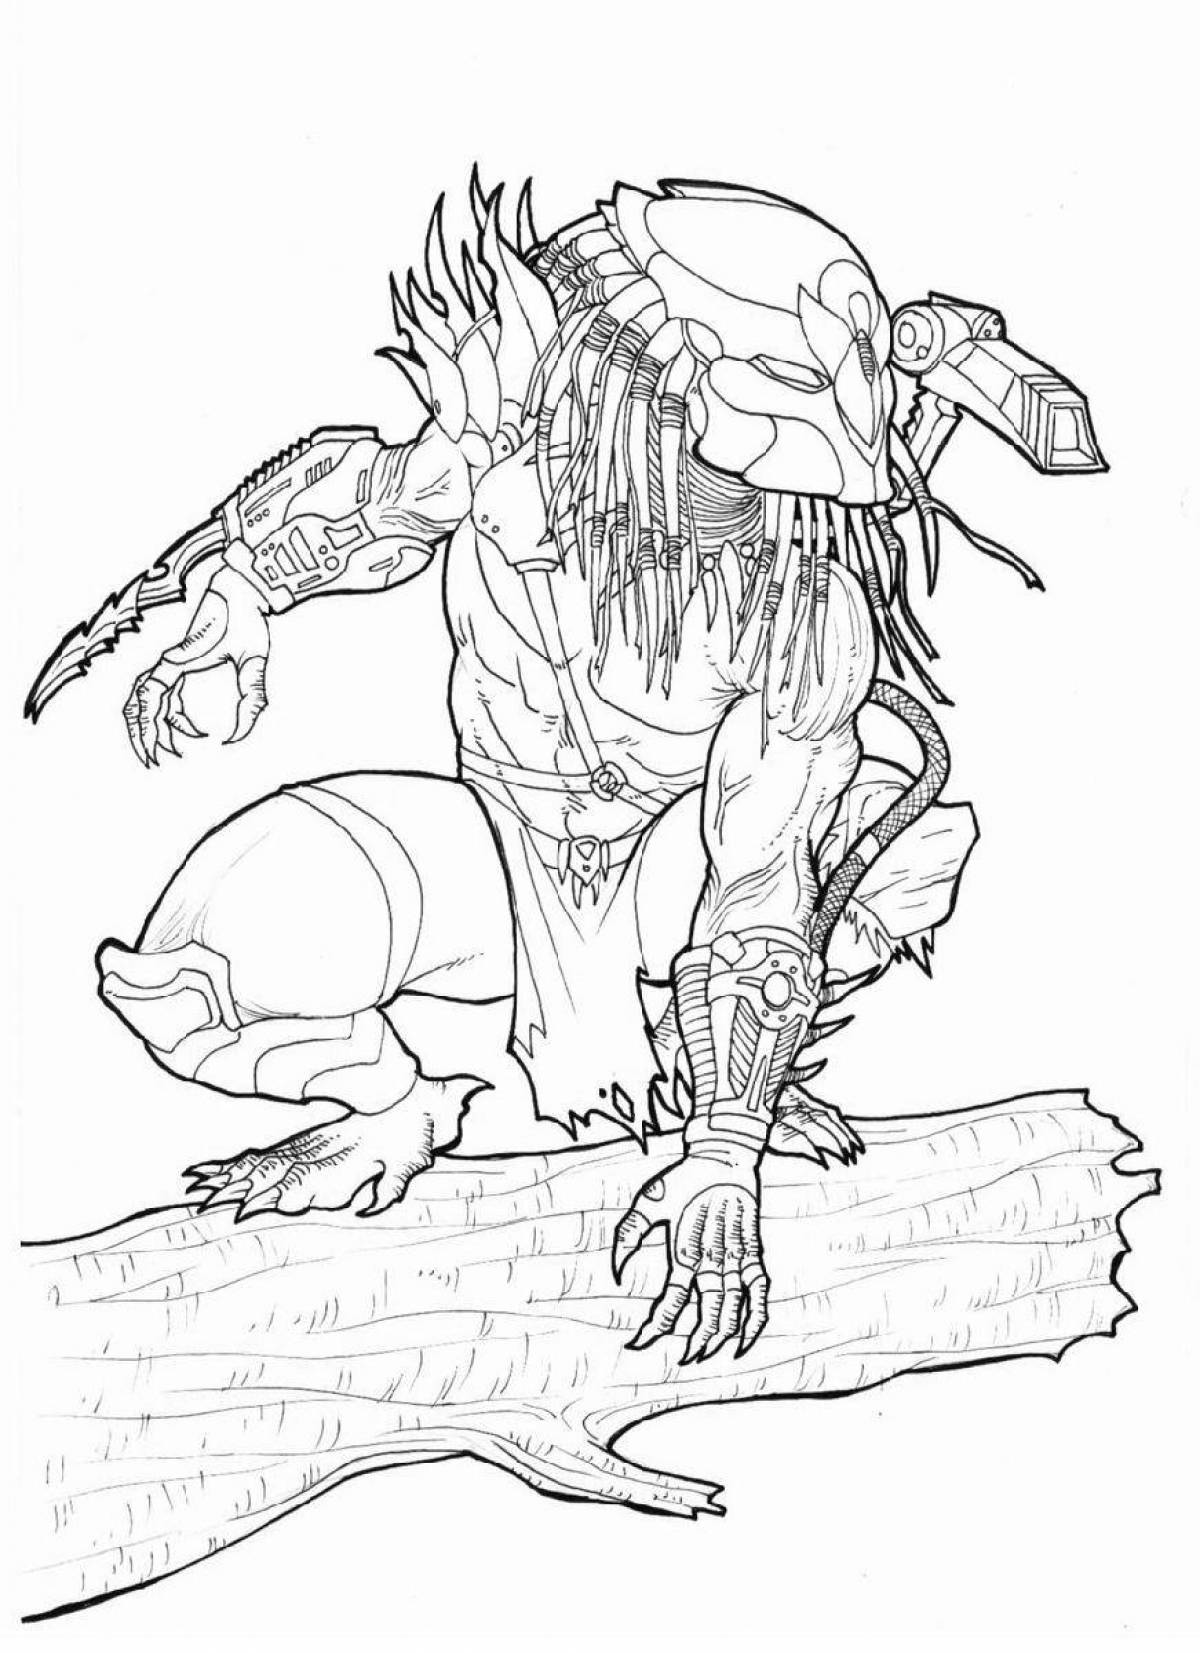 Charming alien and predator coloring book